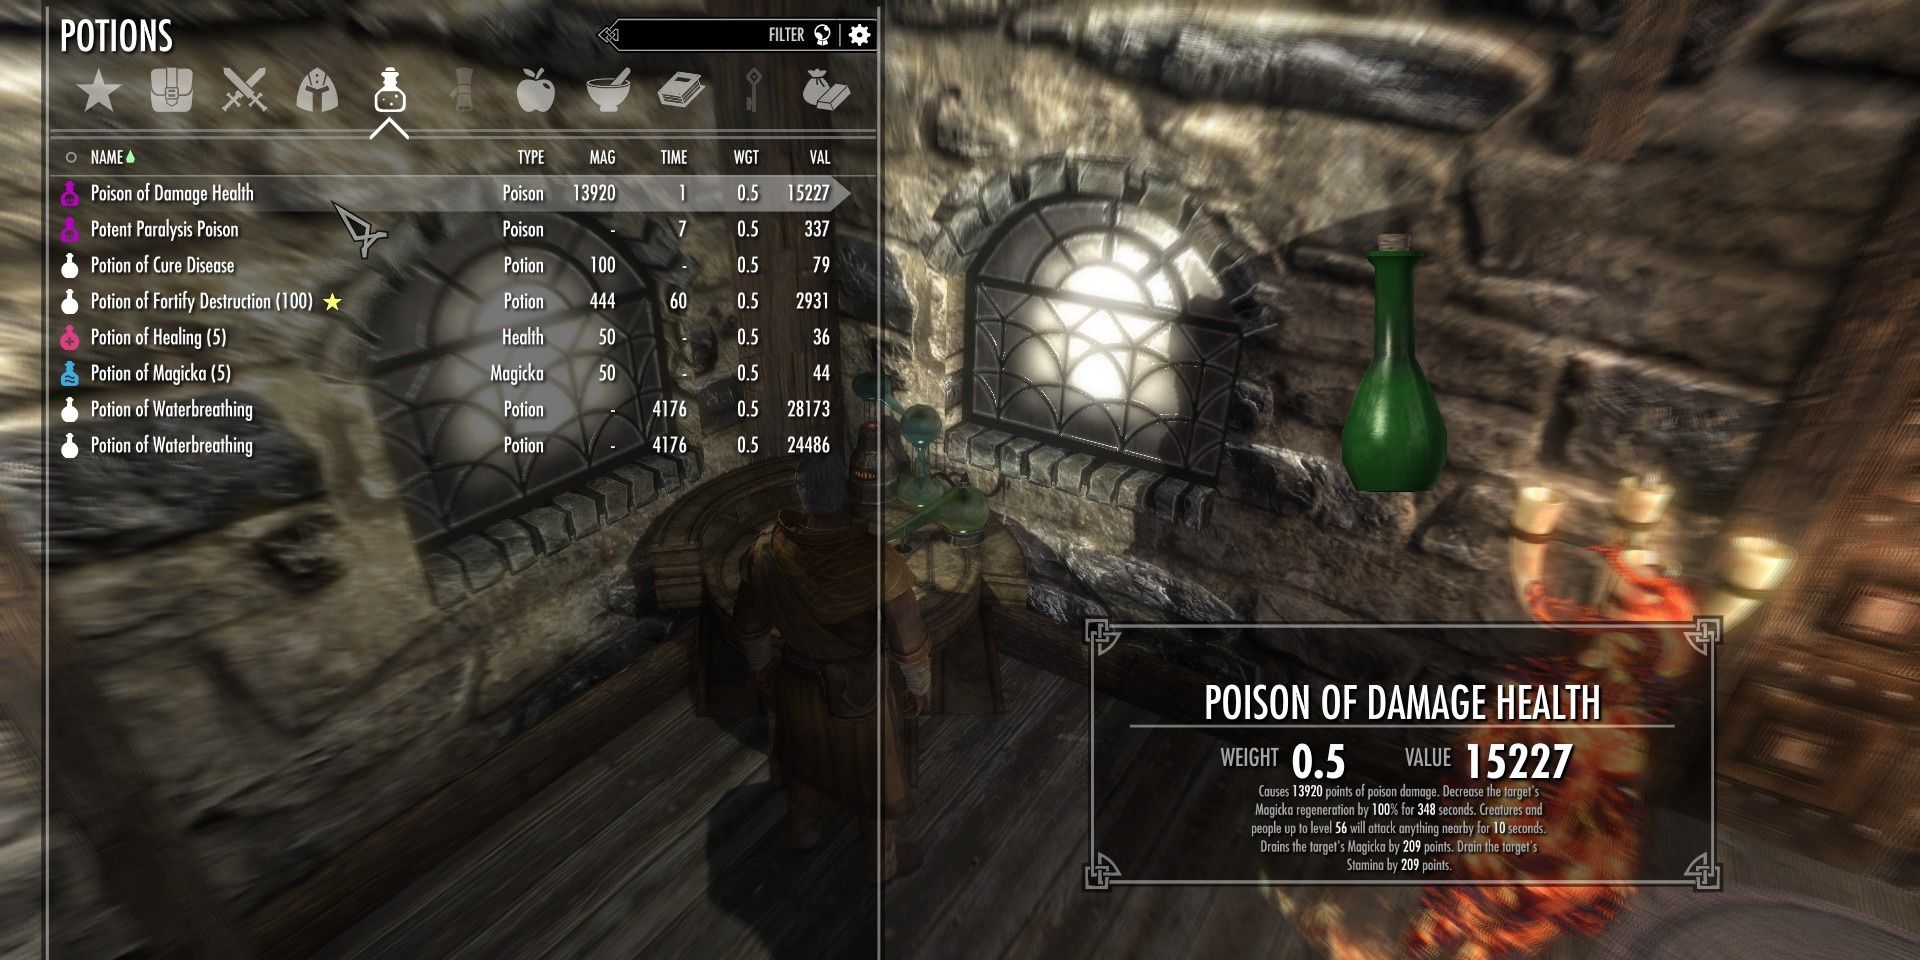 The Most Lethal Poison In Skyrim